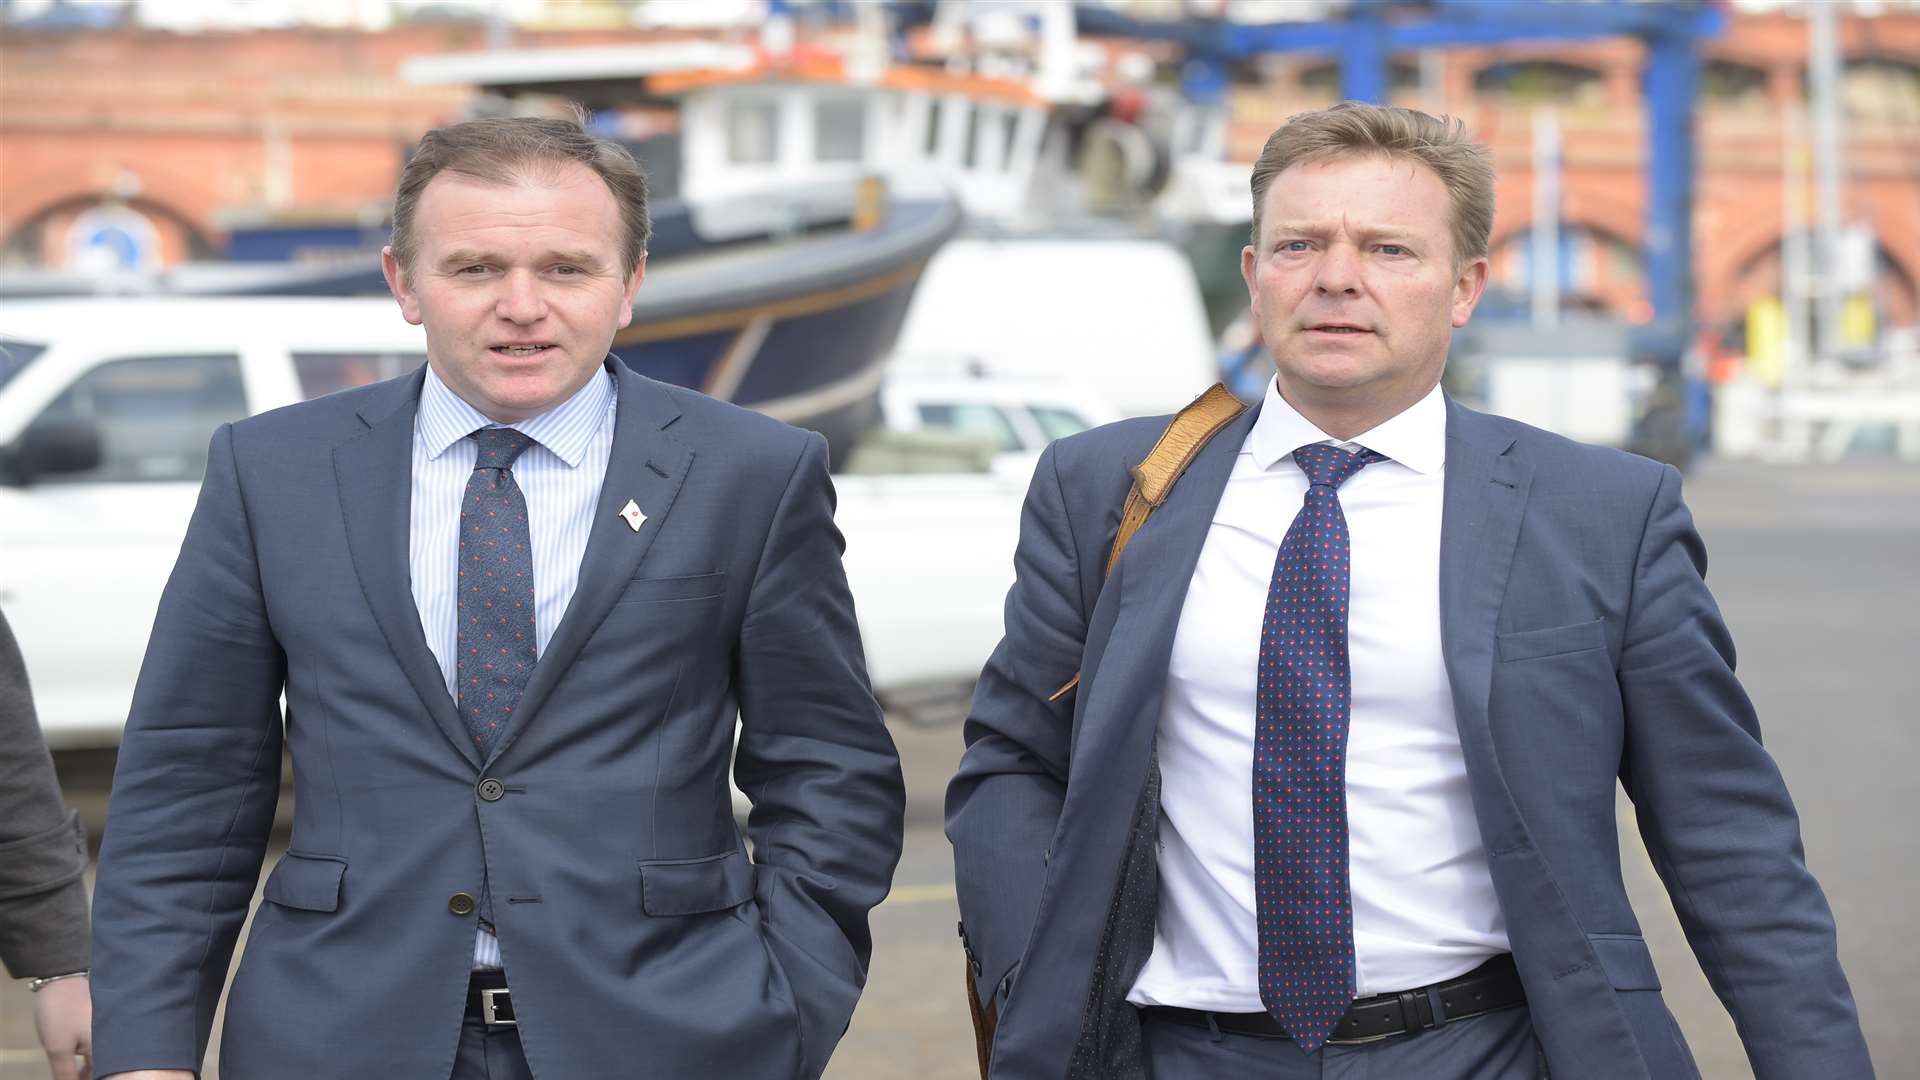 South Thanet MP Craig Mackinlay was joined by George Eustice, Minister of State for the Environment